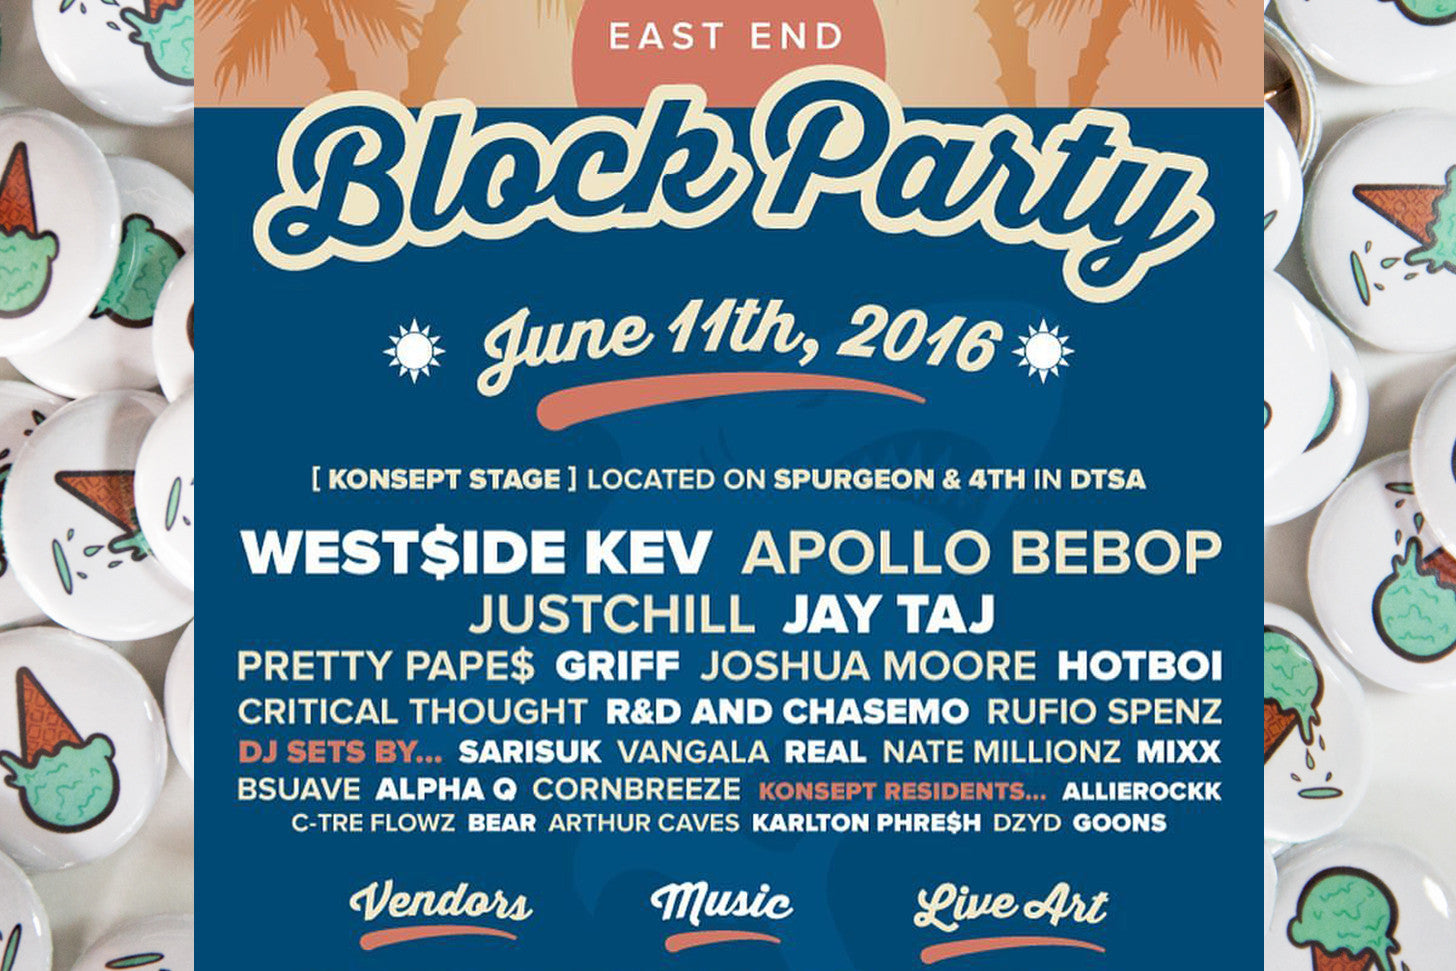 EAST END BLOCK PARTY JUN 11th!